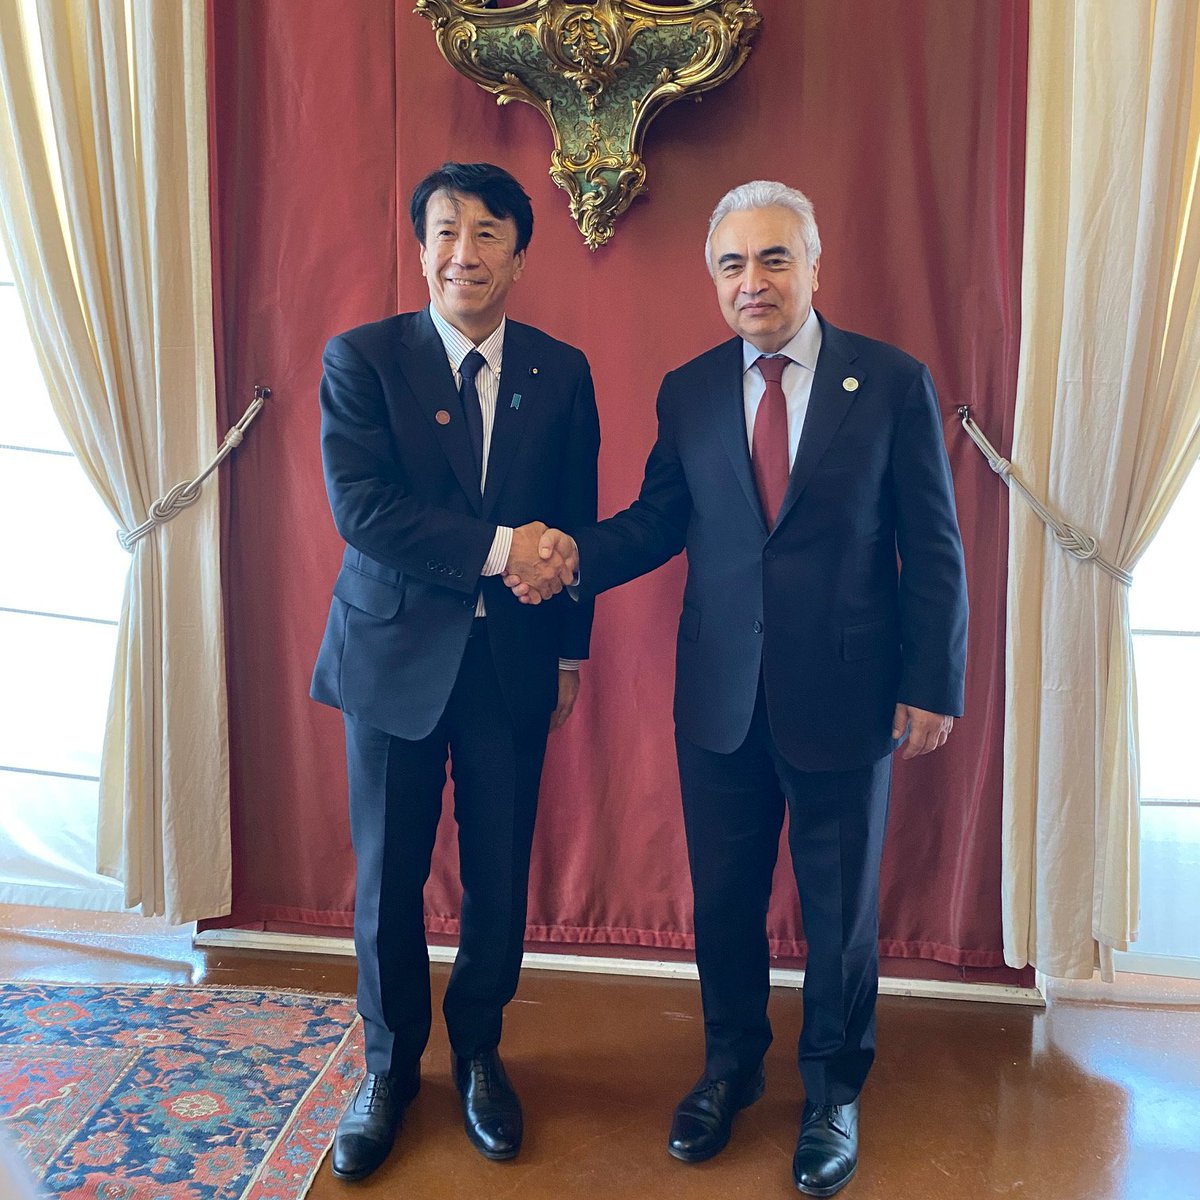 Delighted to meet with Japan’s Minister of Economy, Trade & Industry Ken Saito to discuss @IEA’s follow-up work on the outcomes of 🇯🇵’s 2023 #G7 Summit We also spoke about nuclear power's role in energy transitions, as well as supply security for critical minerals & natural gas